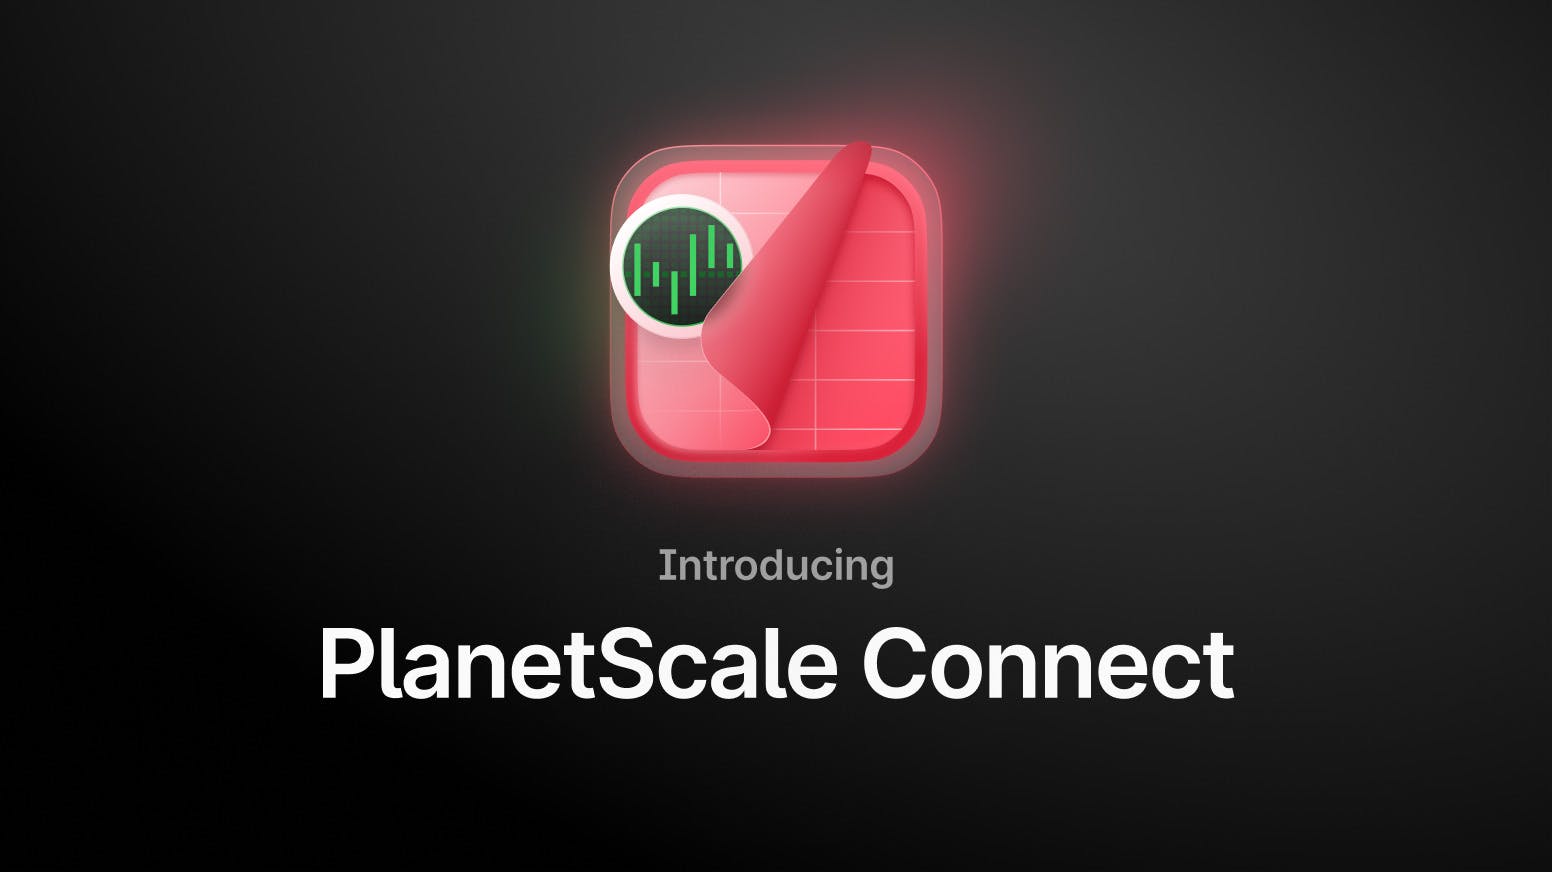 PlanetScale Connect